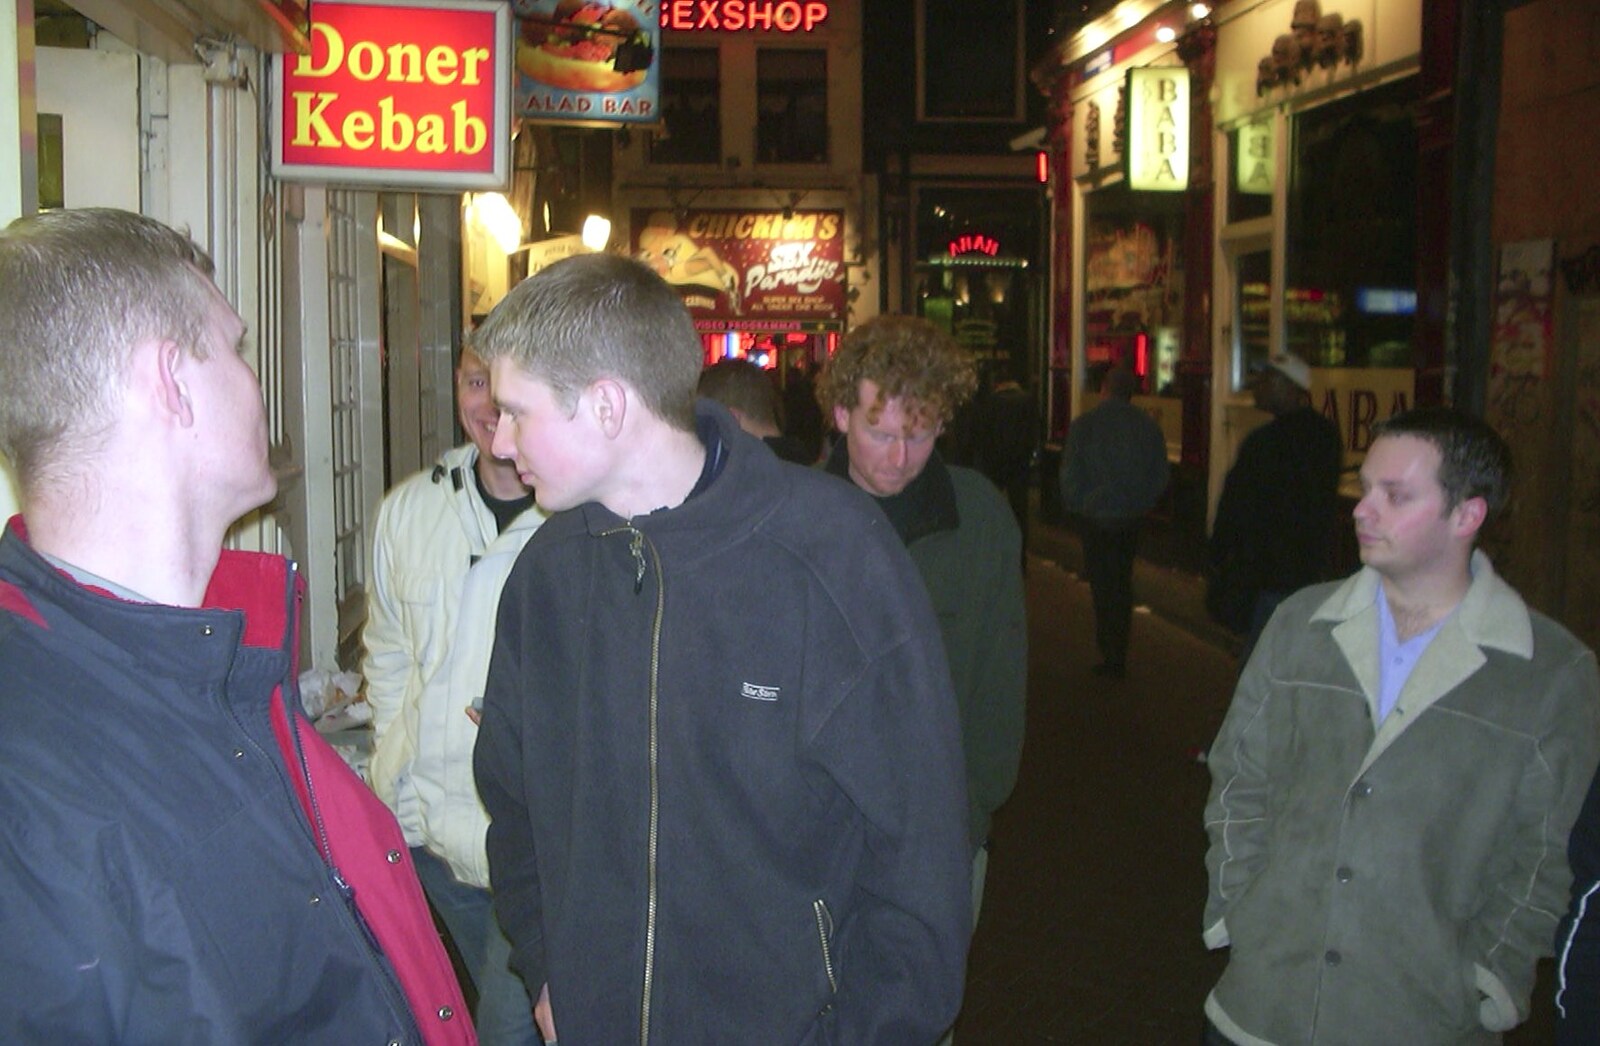 Kebab shop central from Anne Frank, Markets and Mikey-P's Stag Do, Amsterdam, Netherlands - 6th March 2004